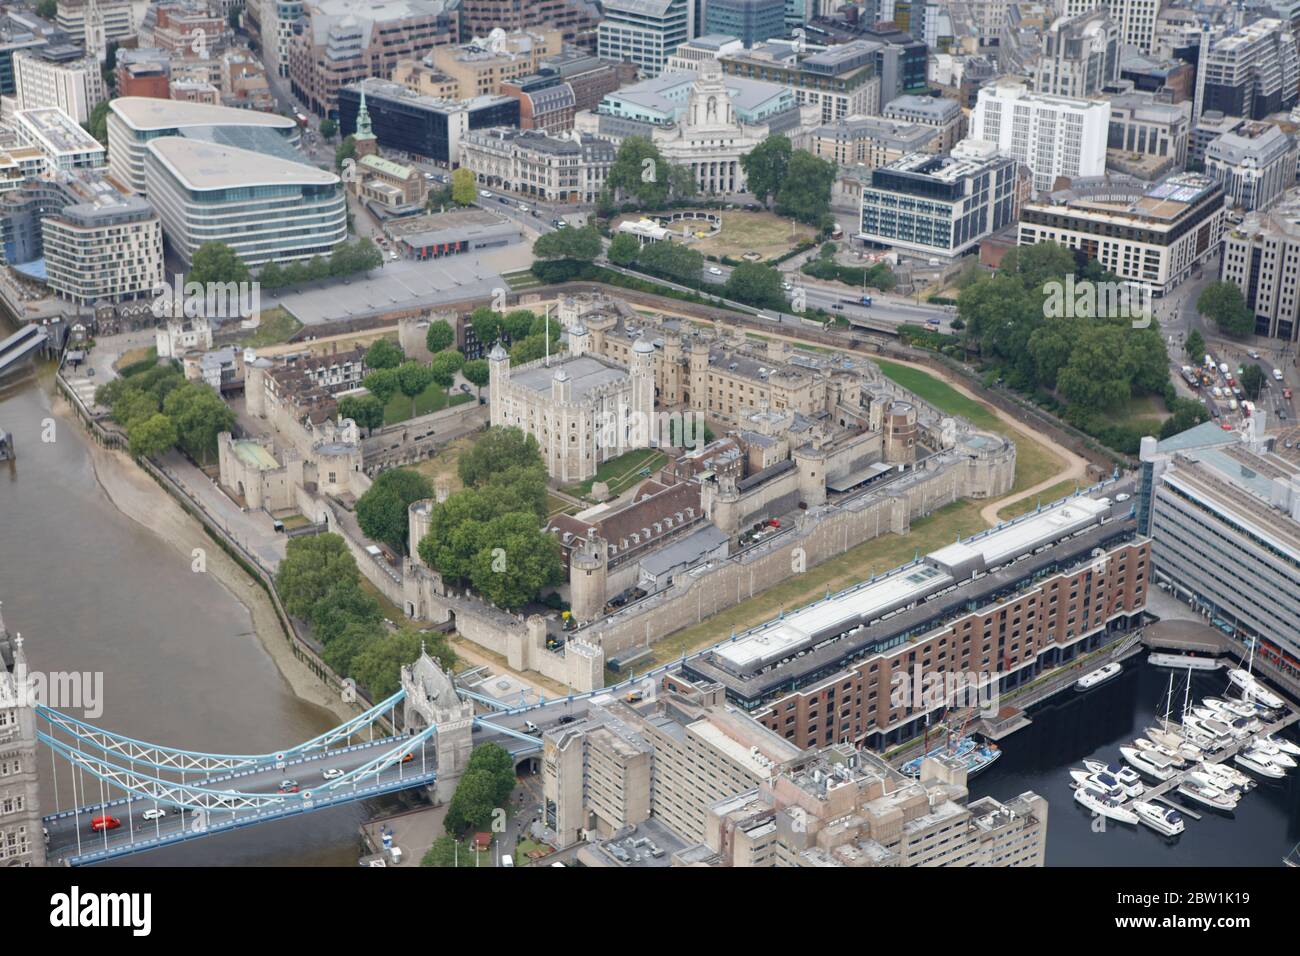 Aerial View of London's Tower of London Stock Photo